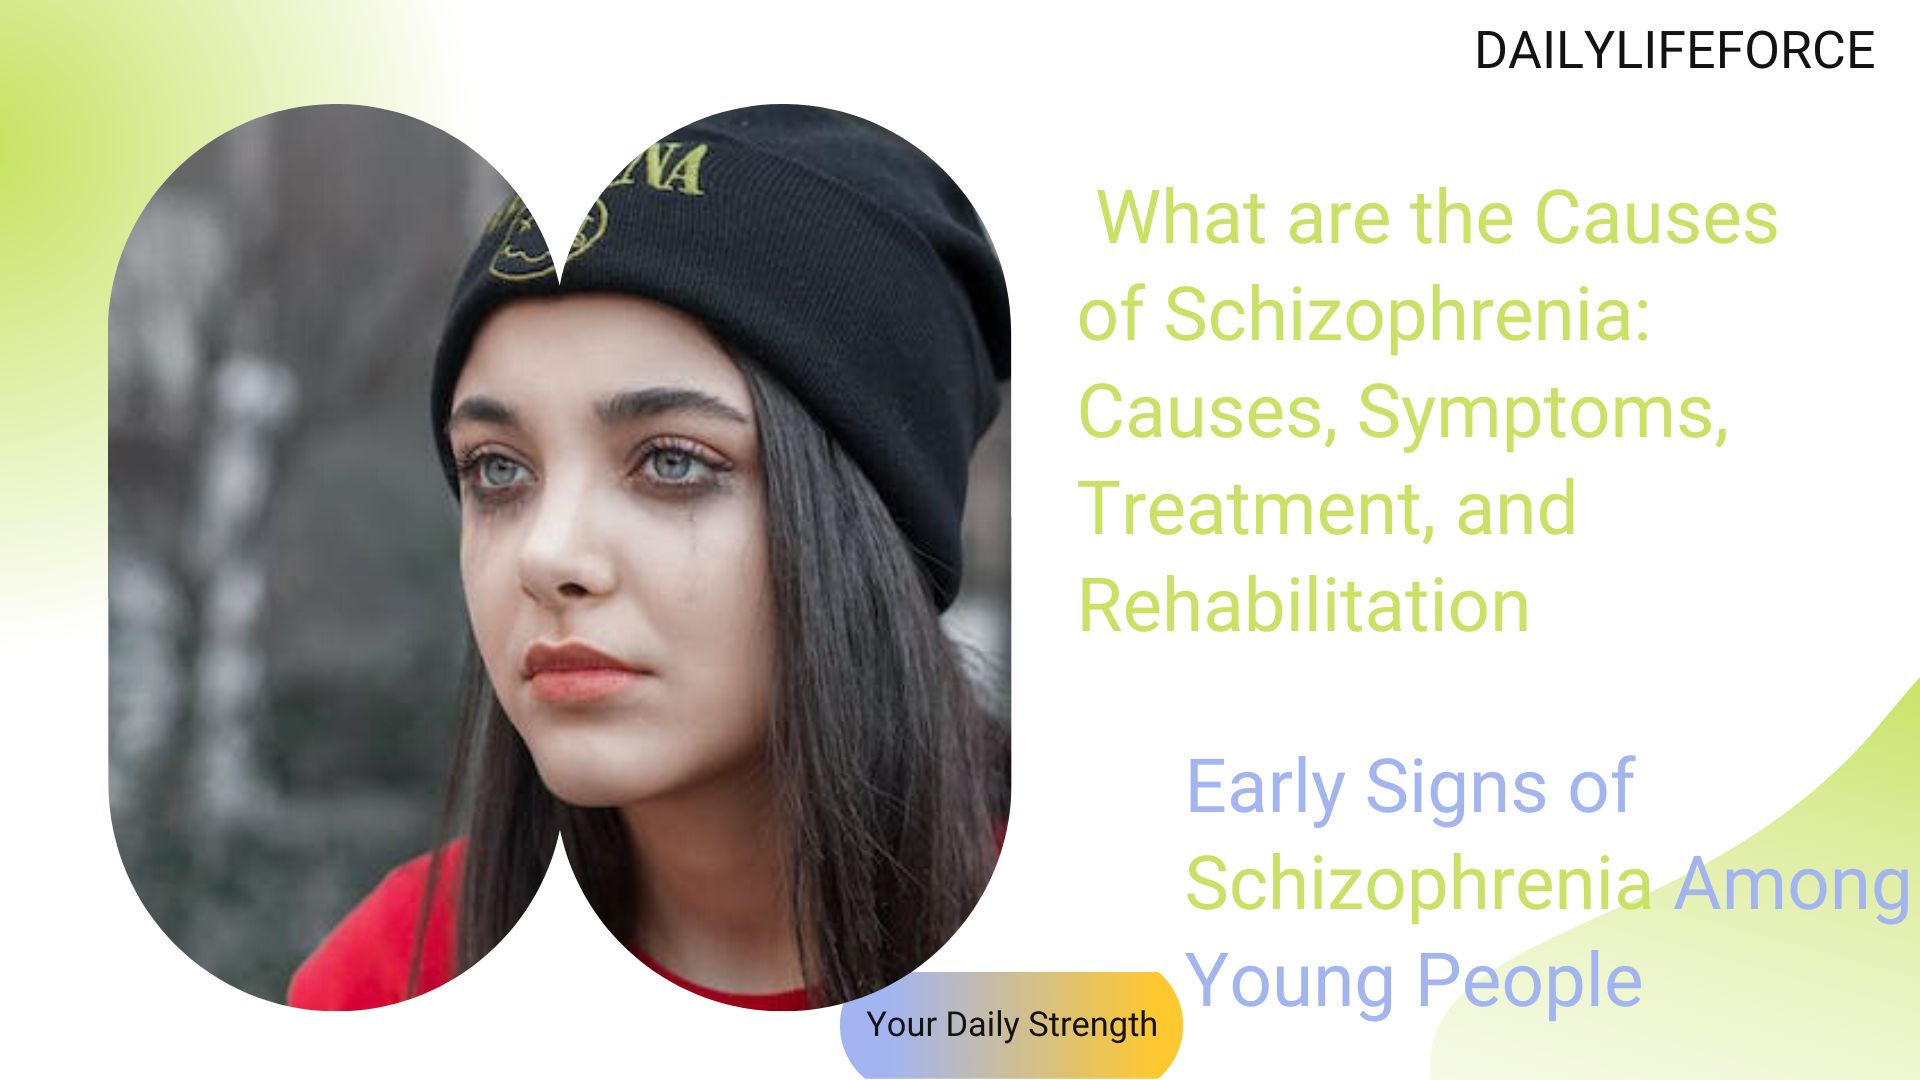 Early Signs of Schizophrenia Among Young People